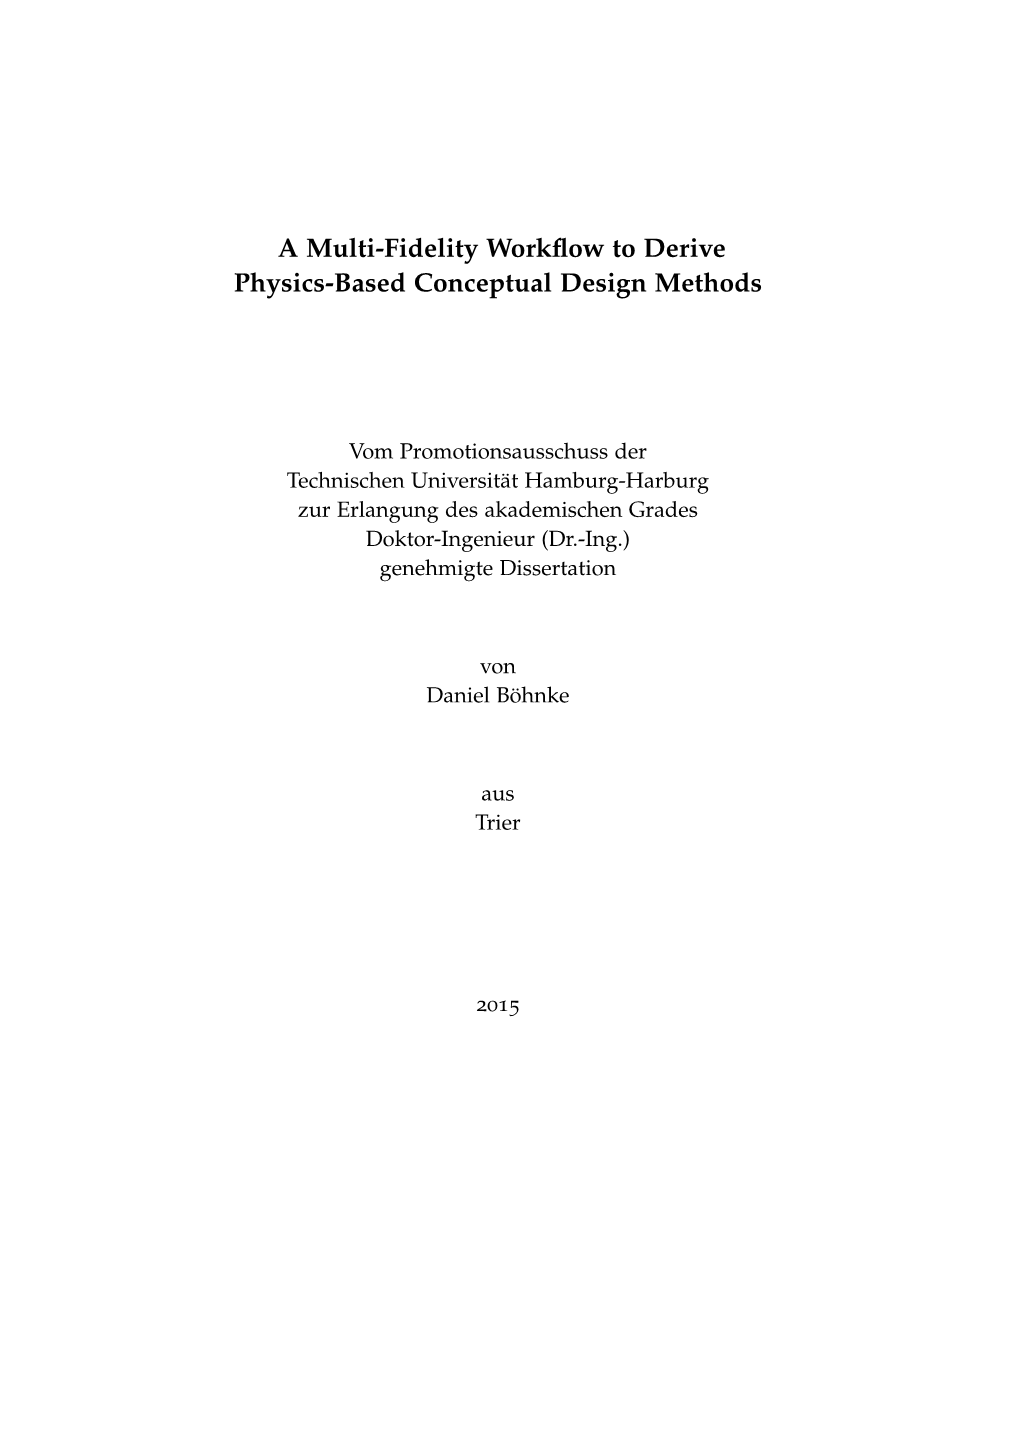 A Multi-Fidelity Workflow to Derive Physics-Based Conceptual Design